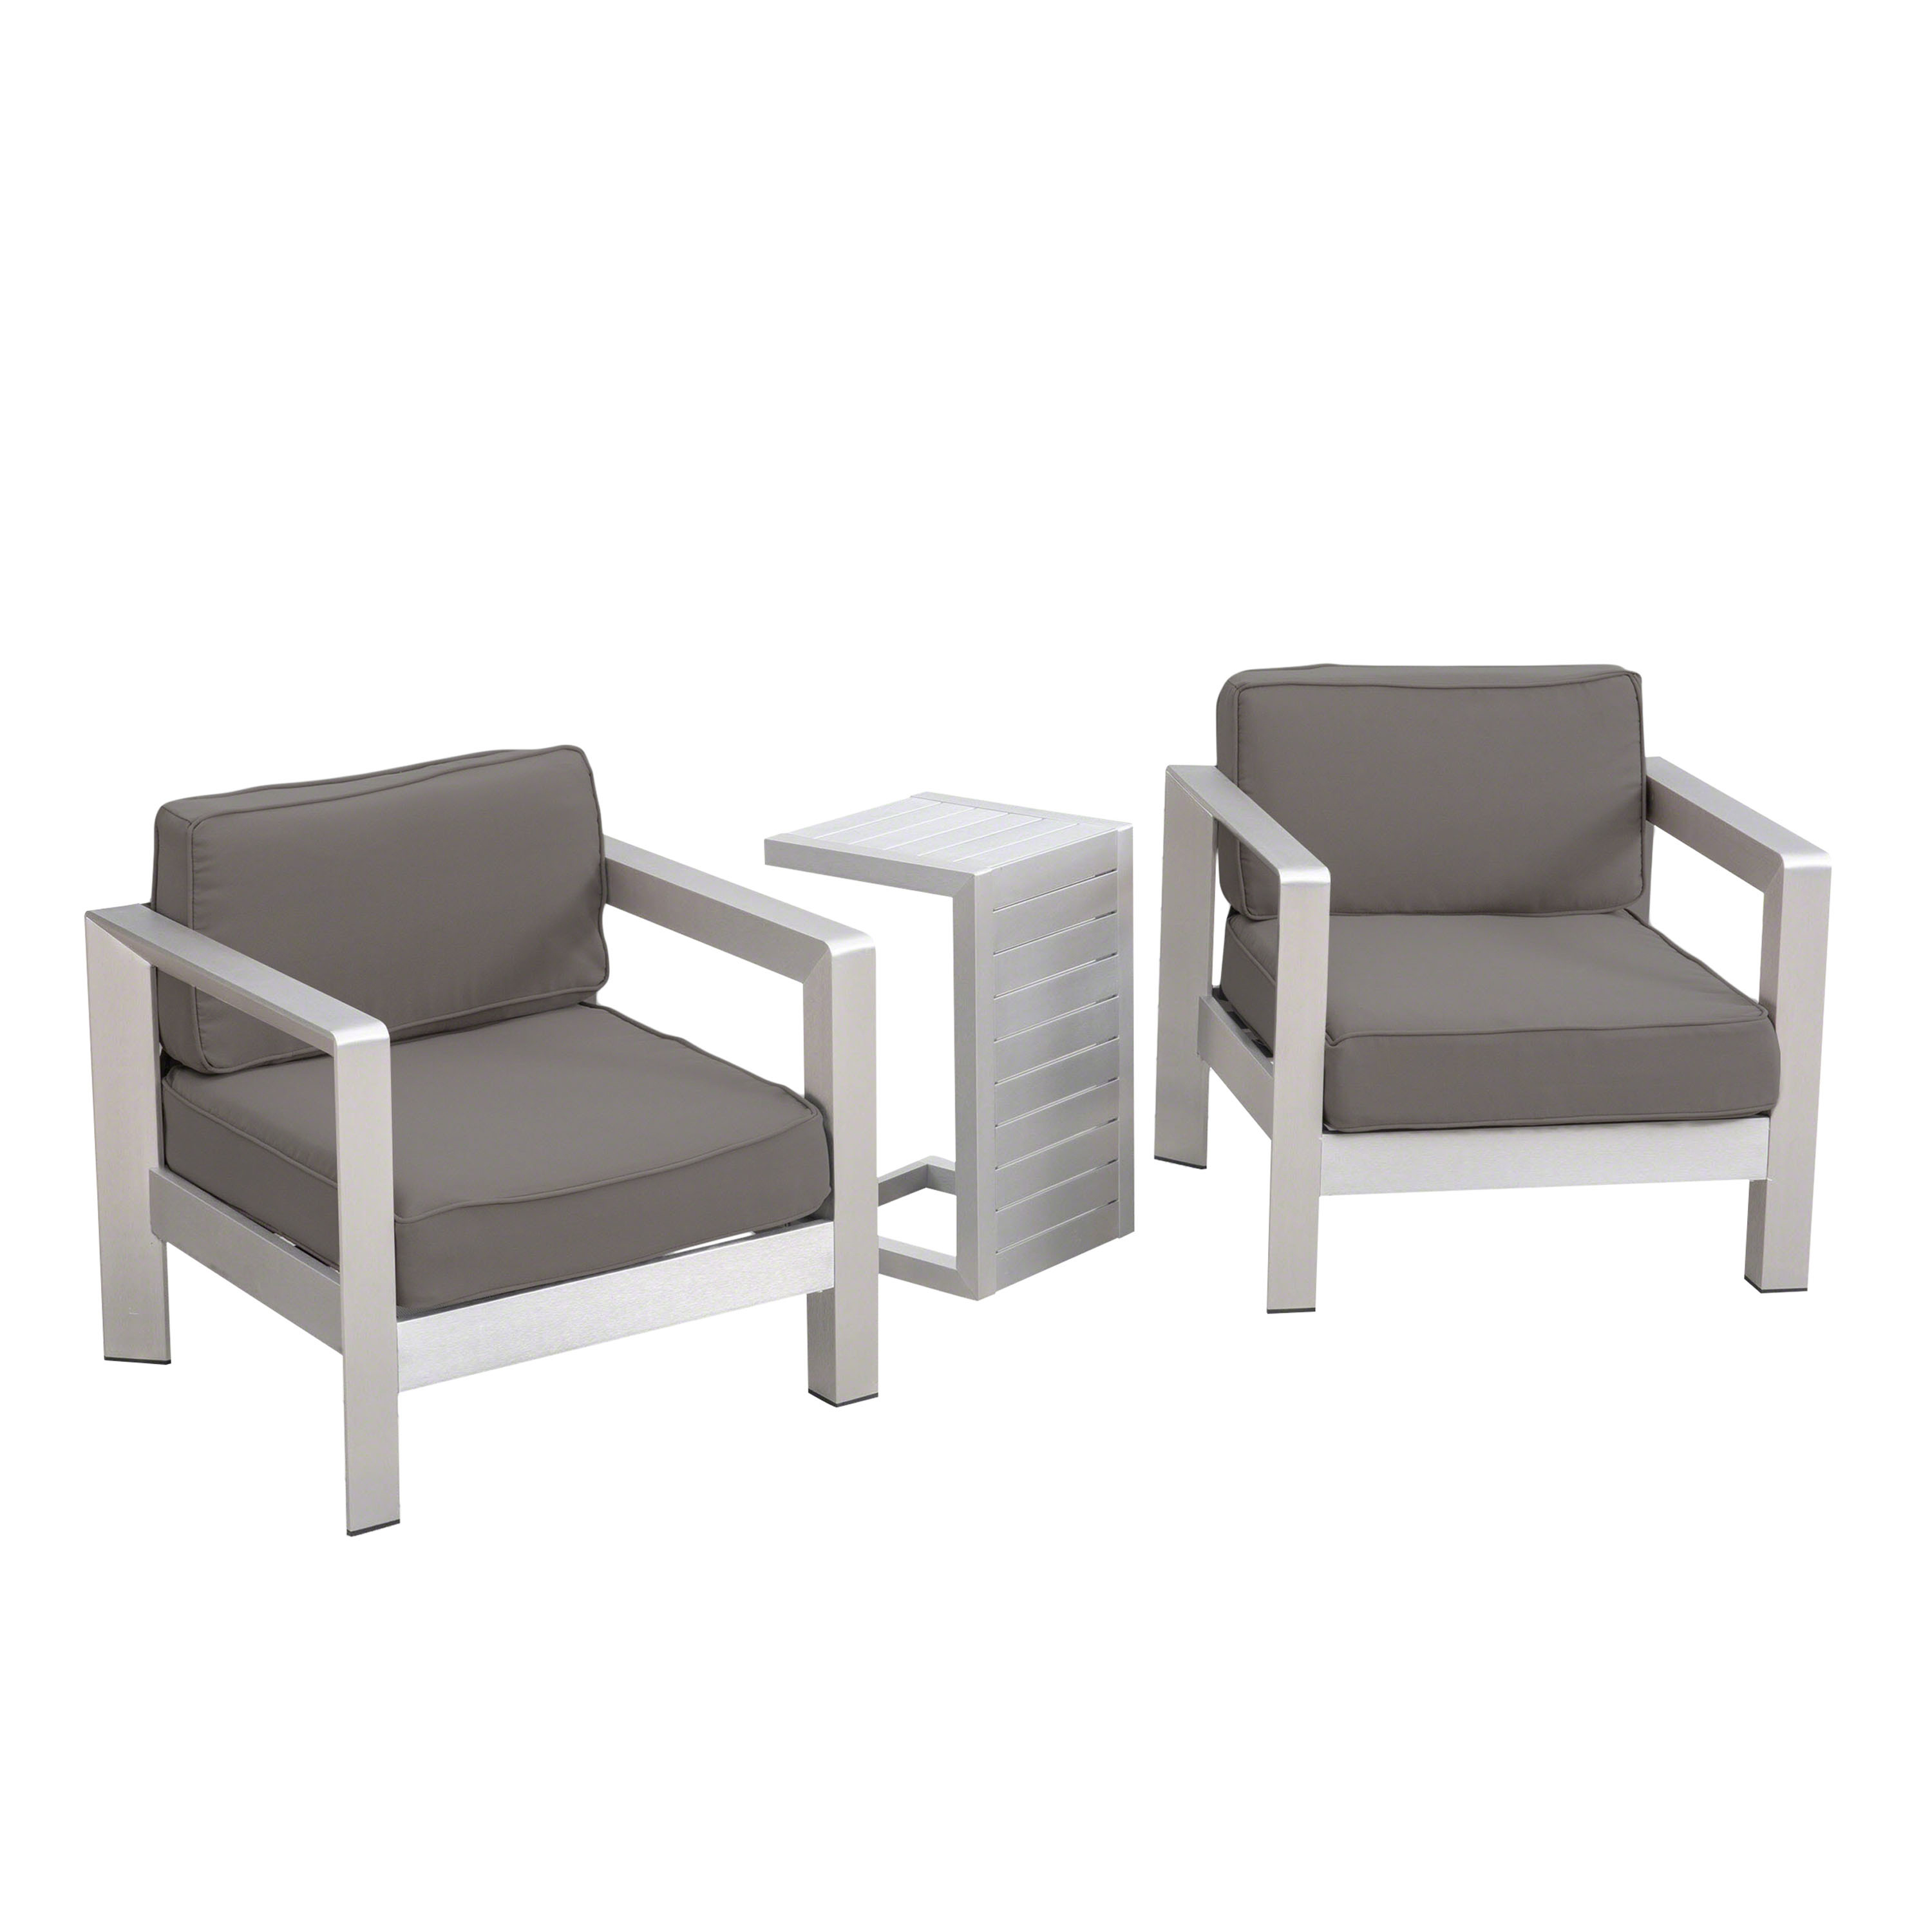 Darius Outdoor Aluminum Club Chairs with Side Table, Sliver, Khaki - image 1 of 10